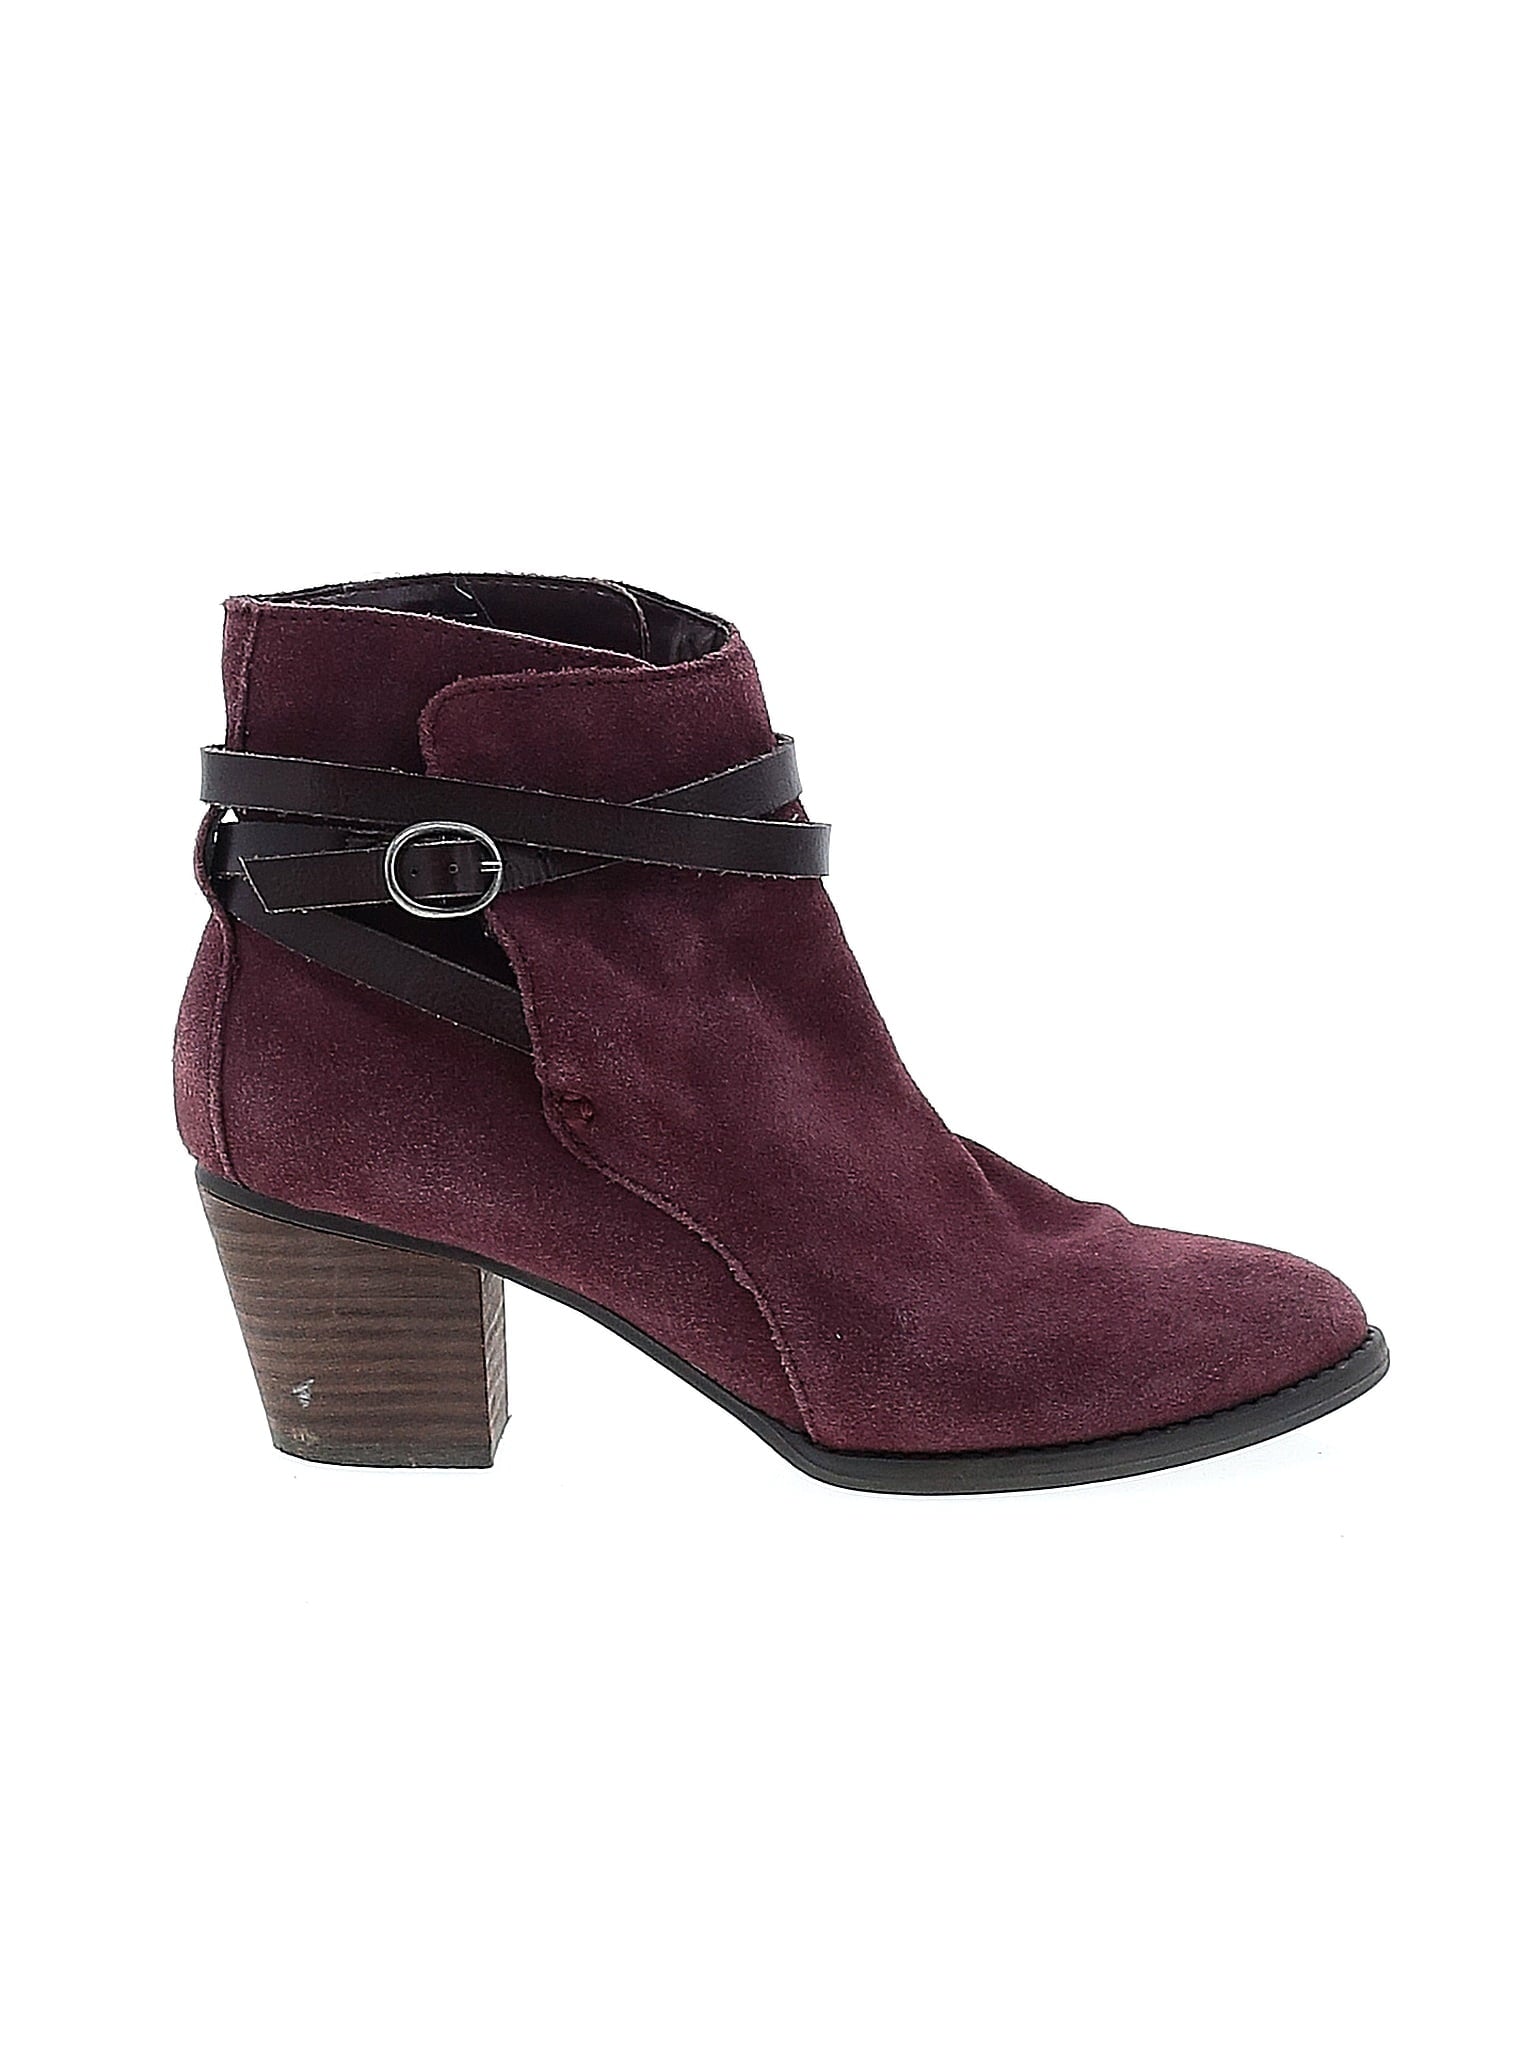 Ankle Boots shoe size - 8